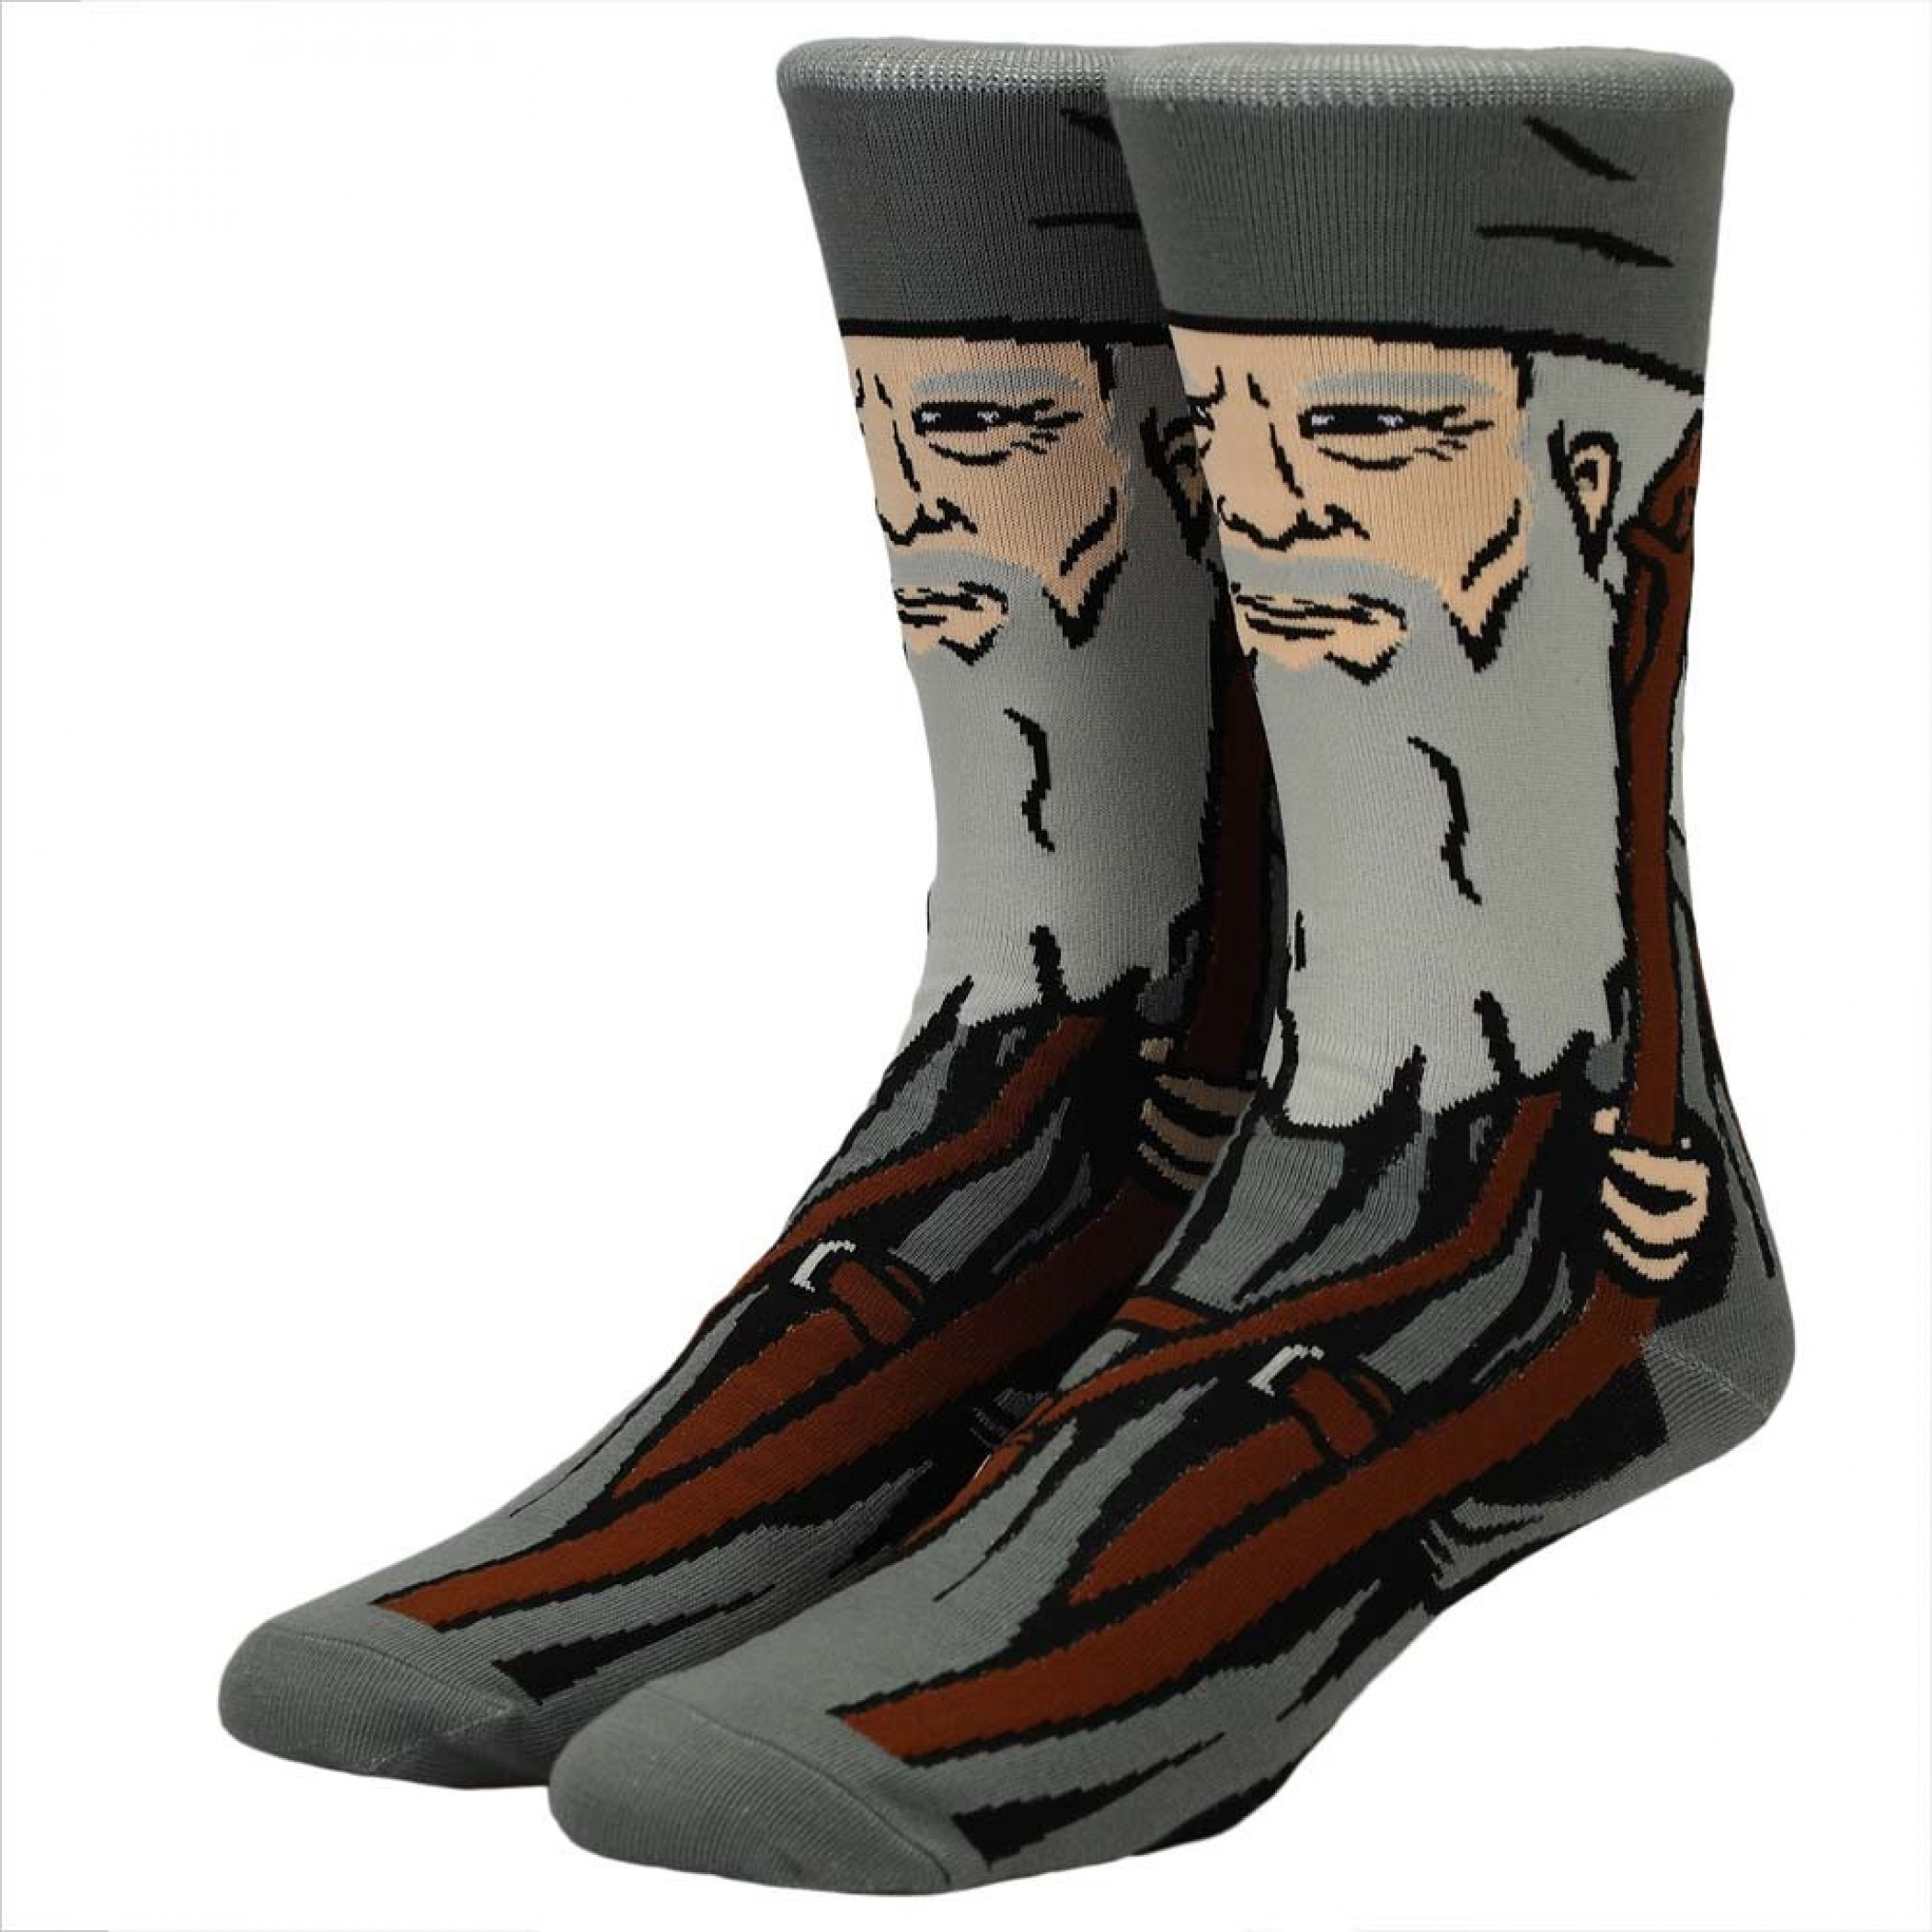 The Lord of the Rings Gandalf 360 Character Crew Socks